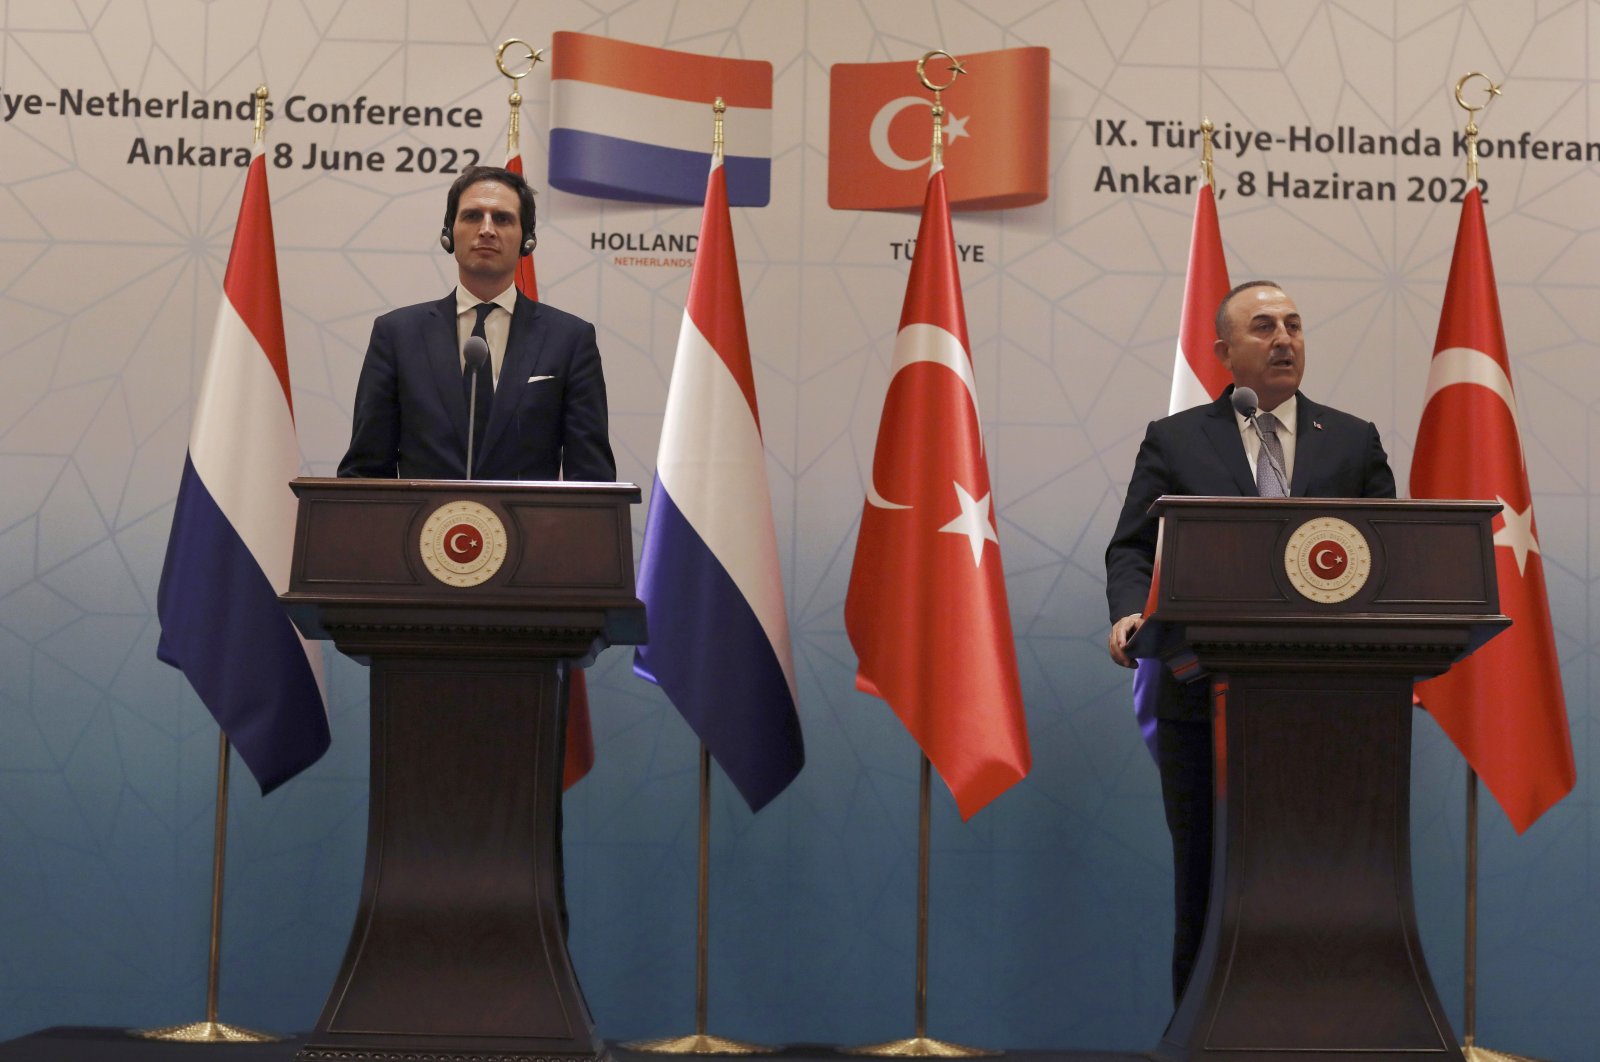 Turkish Foreign Minister Mevlut Cavusoglu (R) and Wopke Hoekstra, Minister of Foreign Affairs of the Kingdom of the Netherlands, speak to the media after the ninth meeting of the Turkish-Dutch Bilateral (Wittenburg) Conference, in Ankara, Turkey, Wednesday, June 8, 2022. (AP Photo/Burhan Ozbilici)